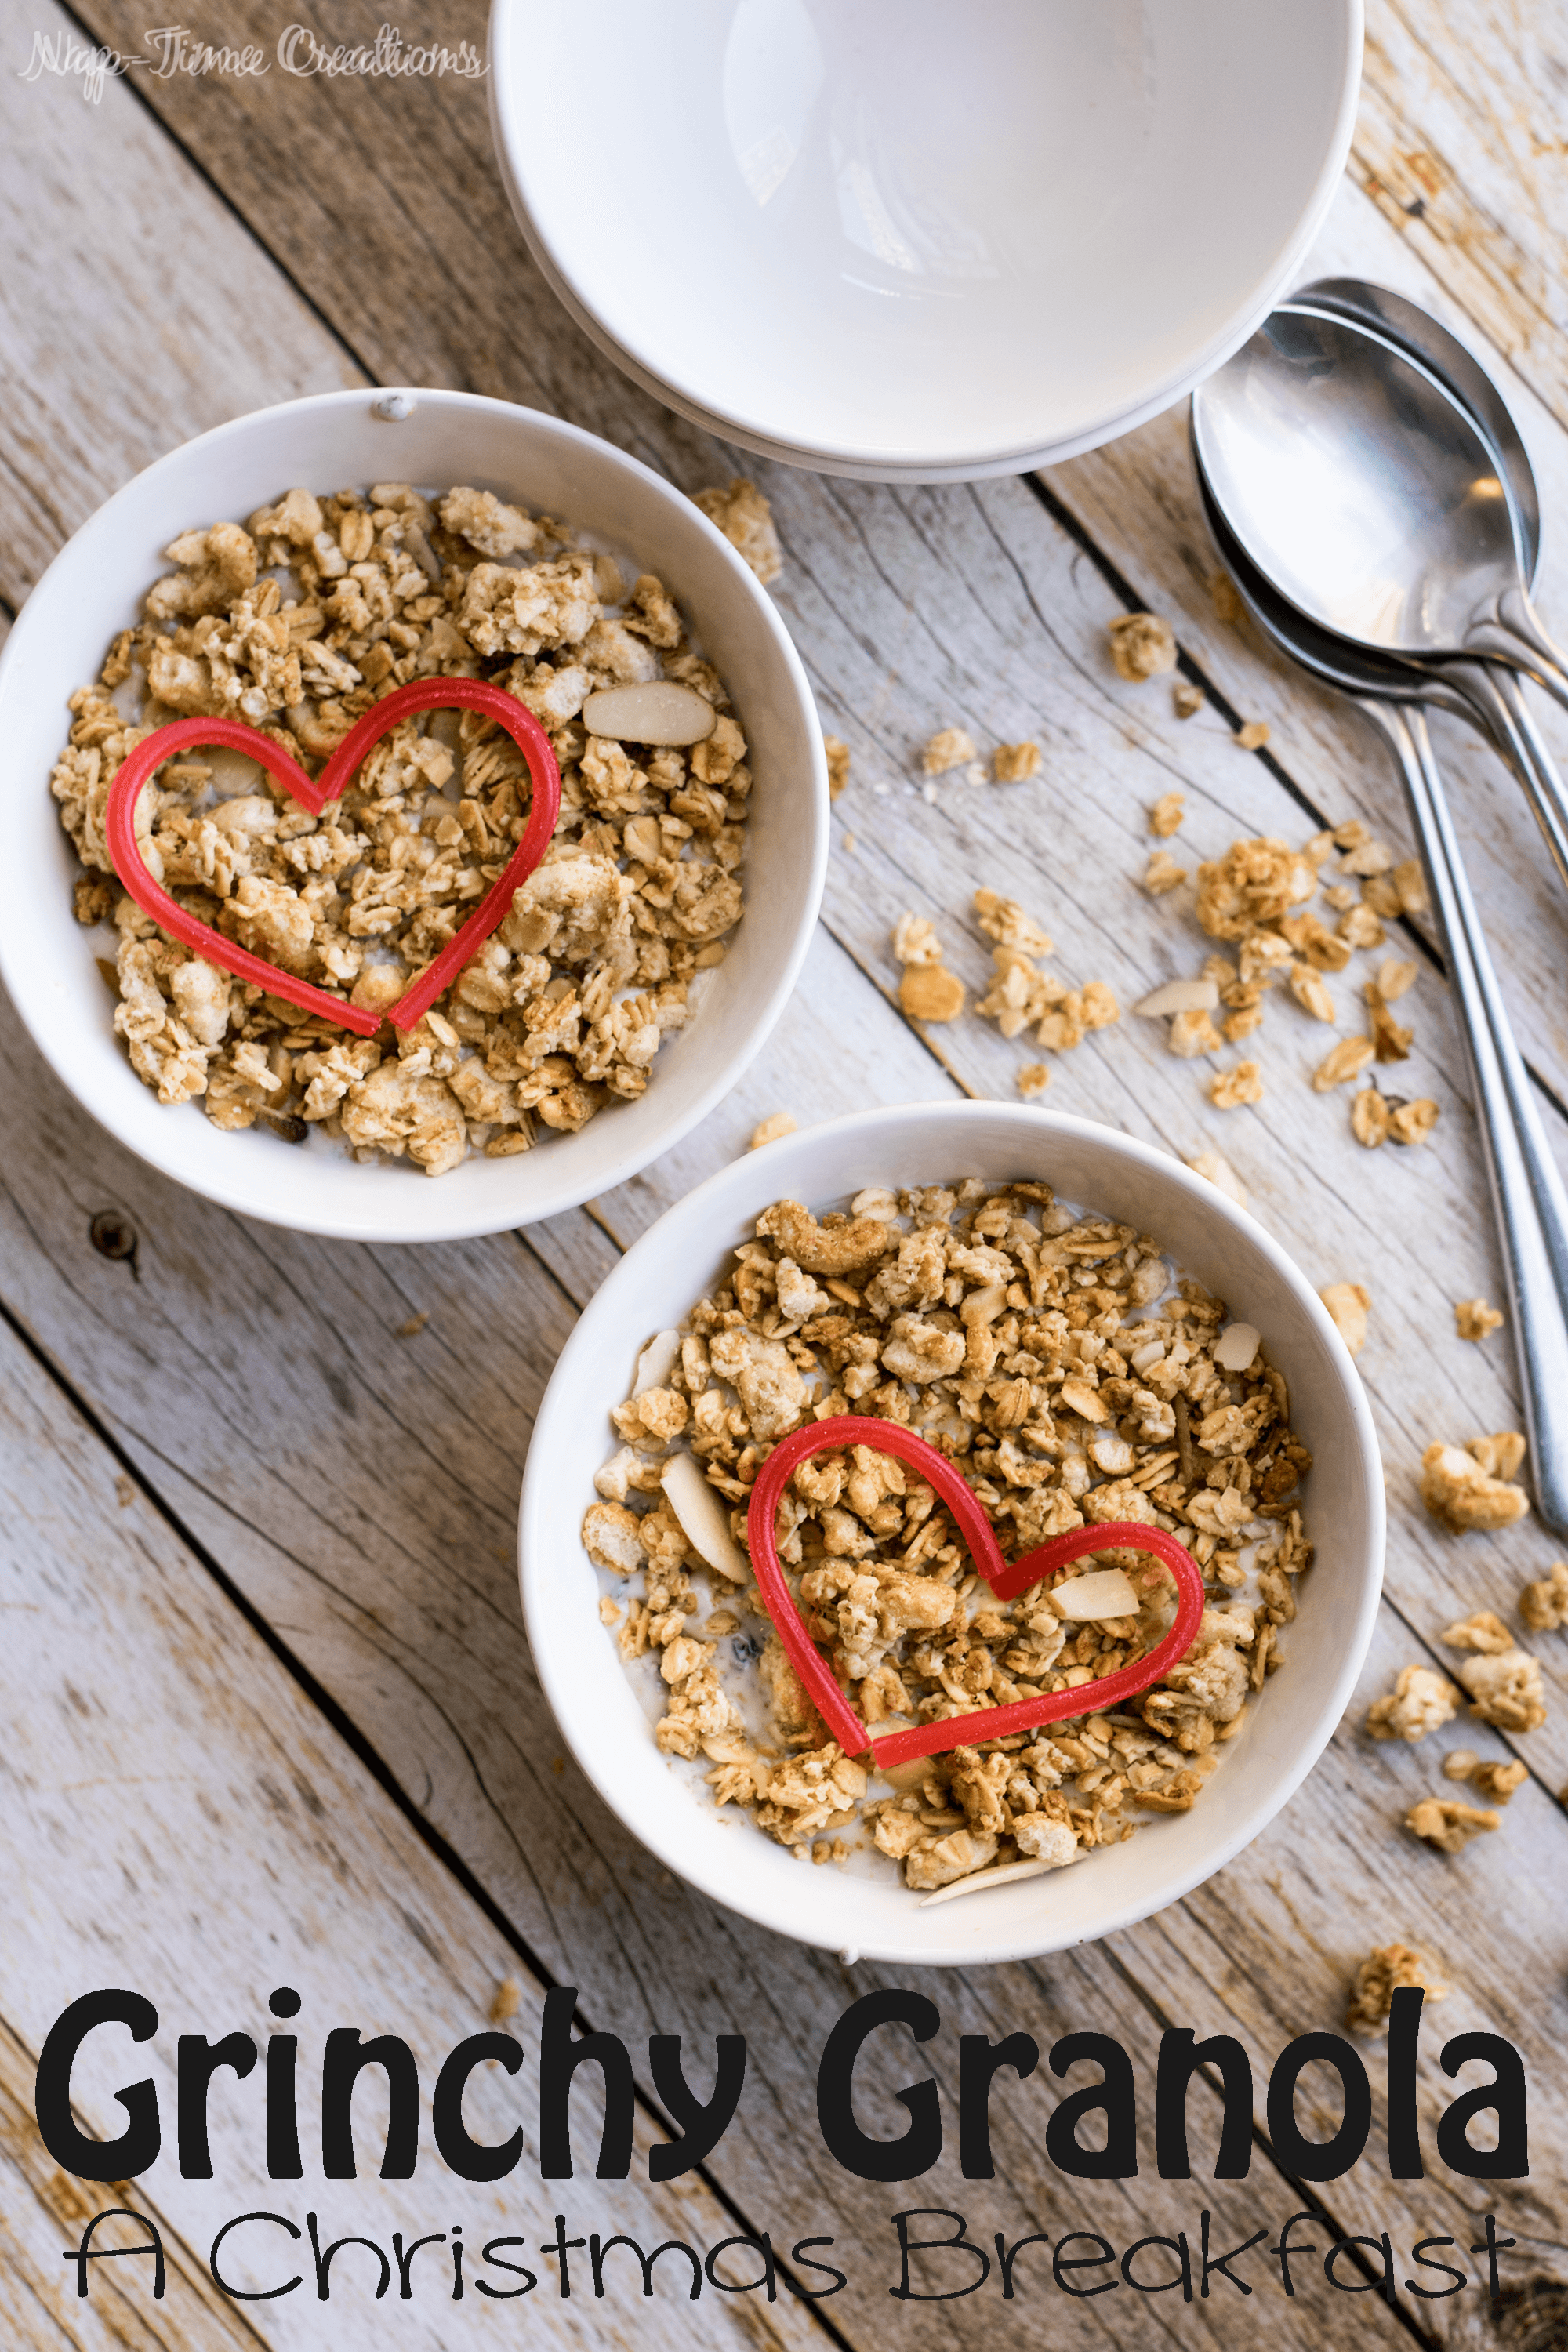 grinchy granola a-fun-Christmas-breakfast-option-from-nap-time-creations #SimplySatisfying AD